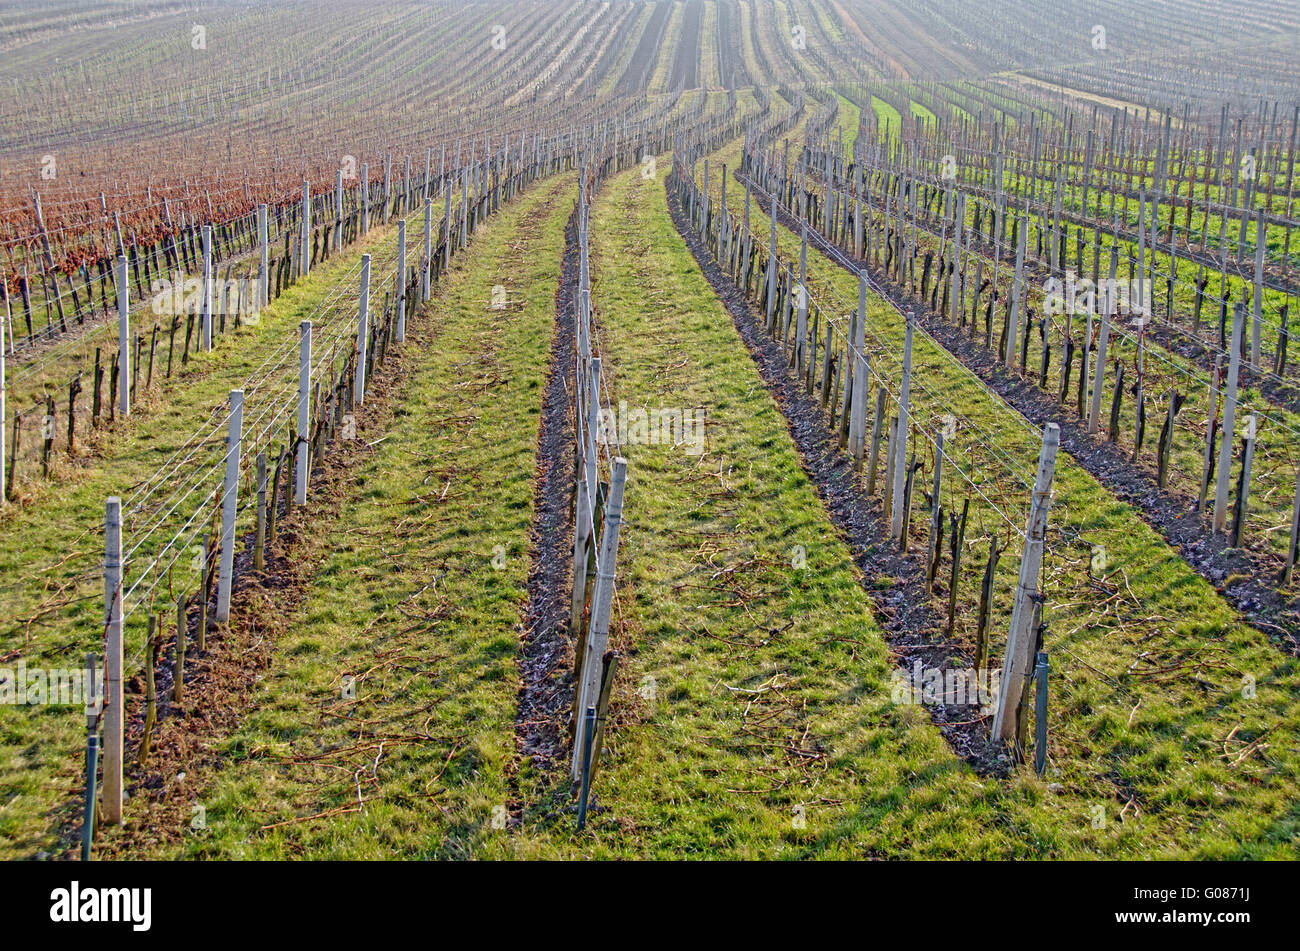 rows of vine stocks in a winter without snow #1 Stock Photo